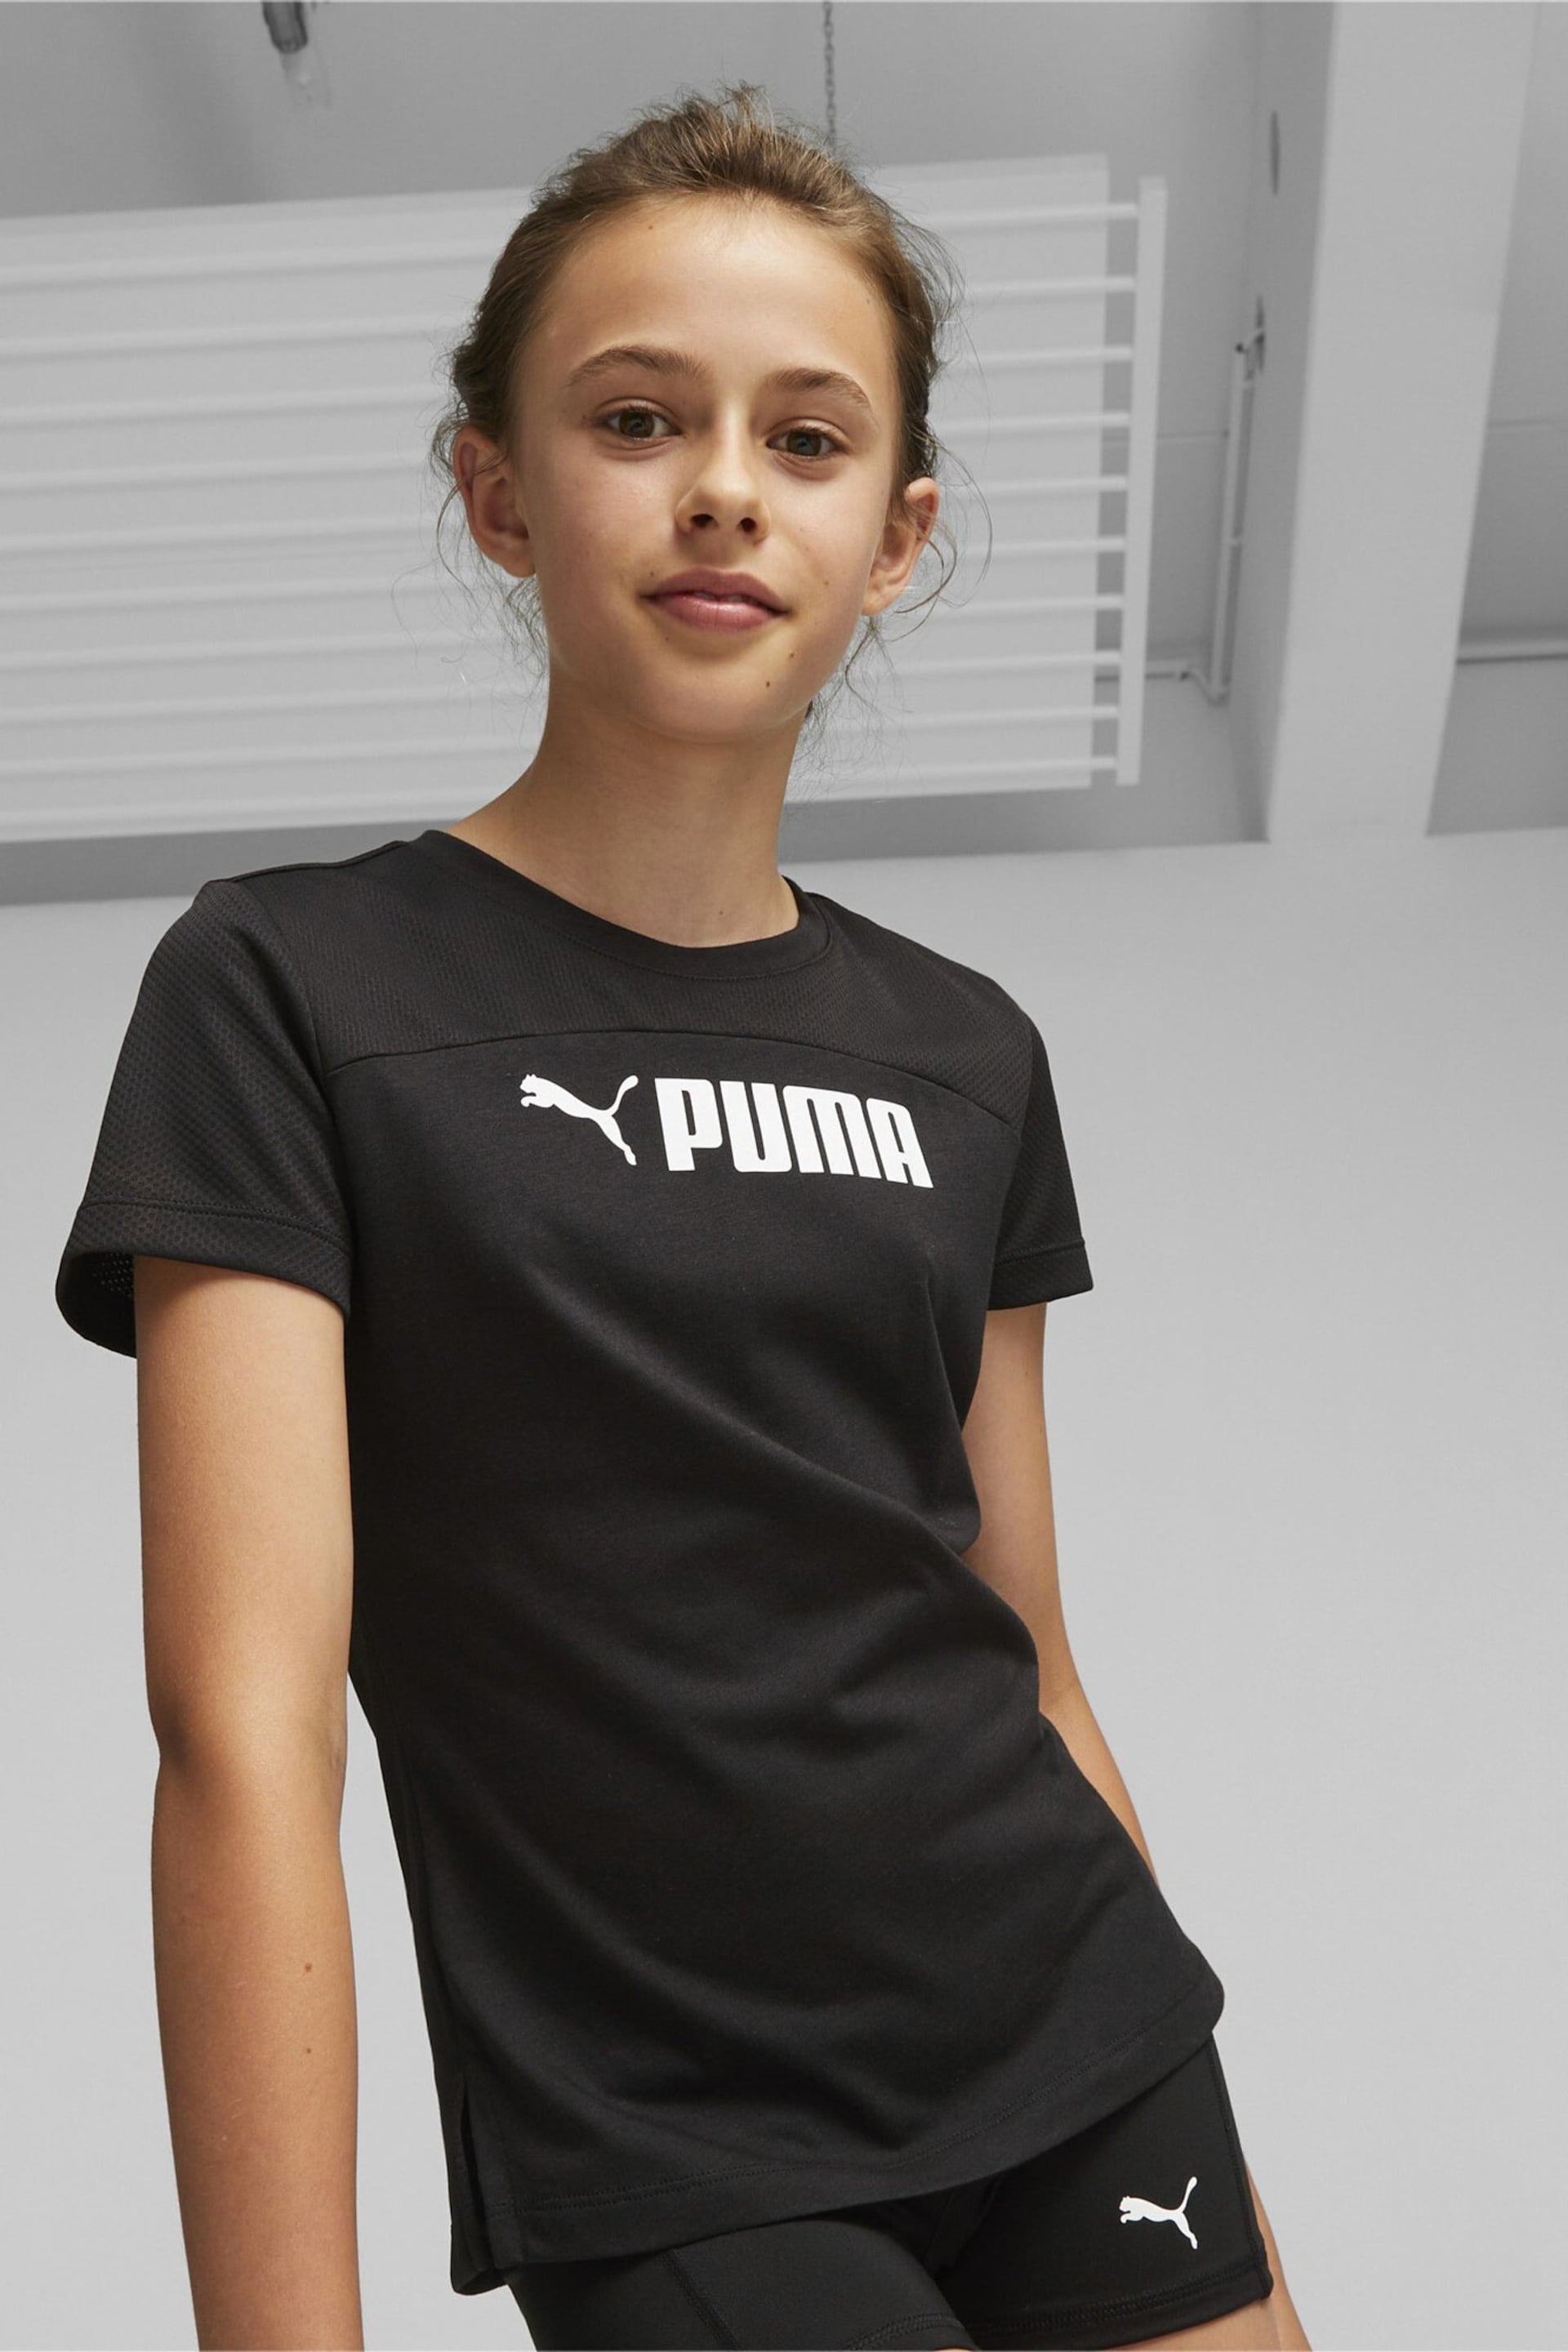 Puma Black FIT Youth T-Shirt - Image 1 of 5